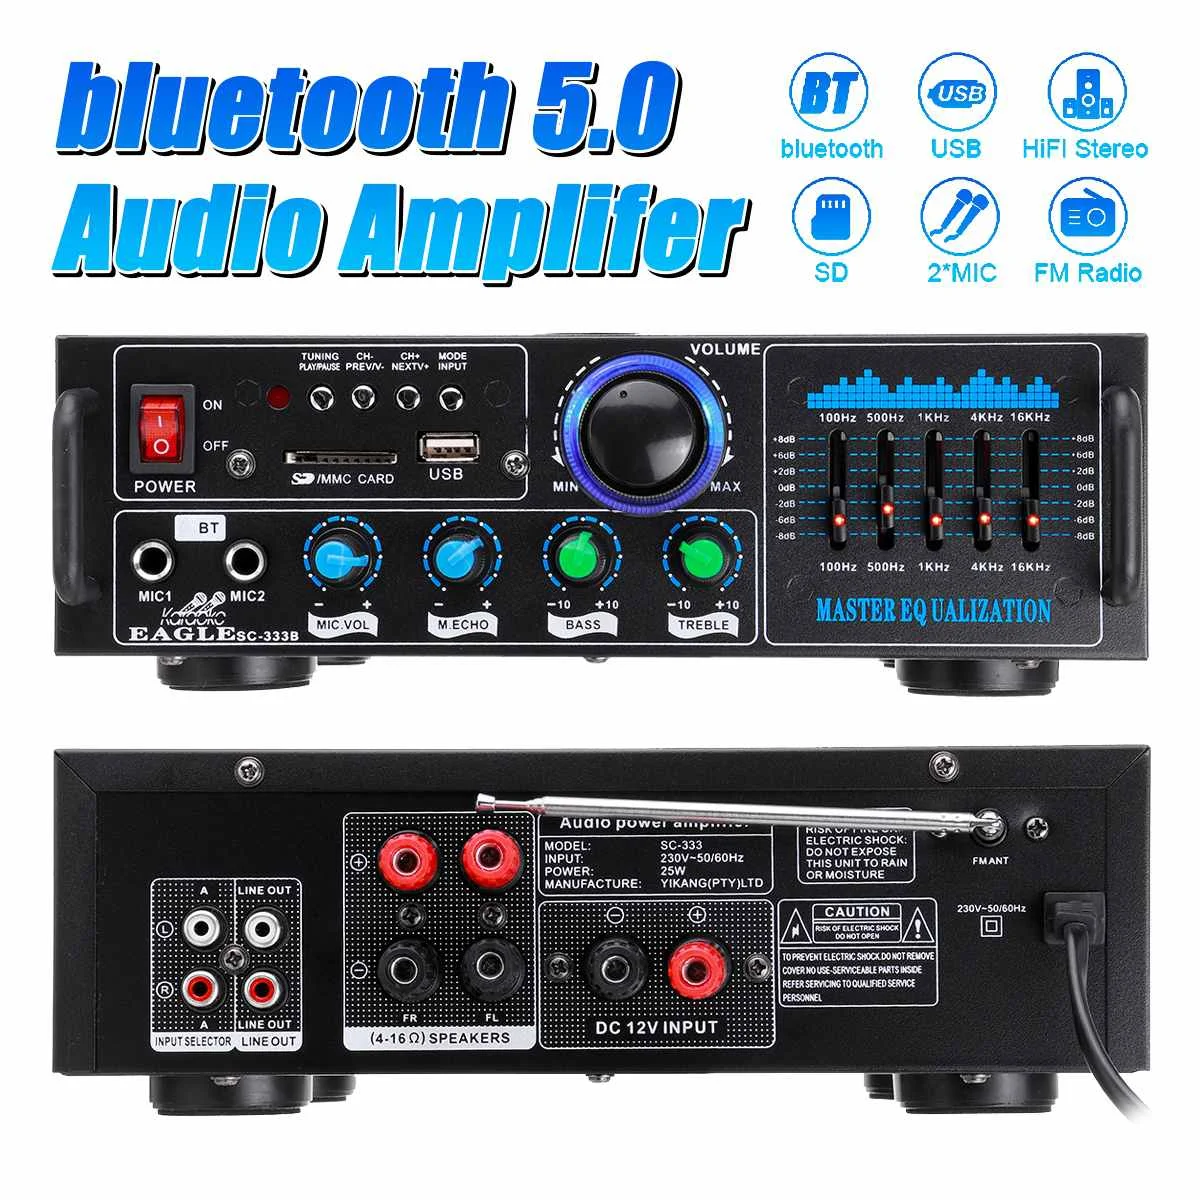 

2000W bluetooth Stereo Amplifier Surround Sound Mixer function FM AUX USB SD AMP Home Cinema Karaoke Remote Control with 2Mic